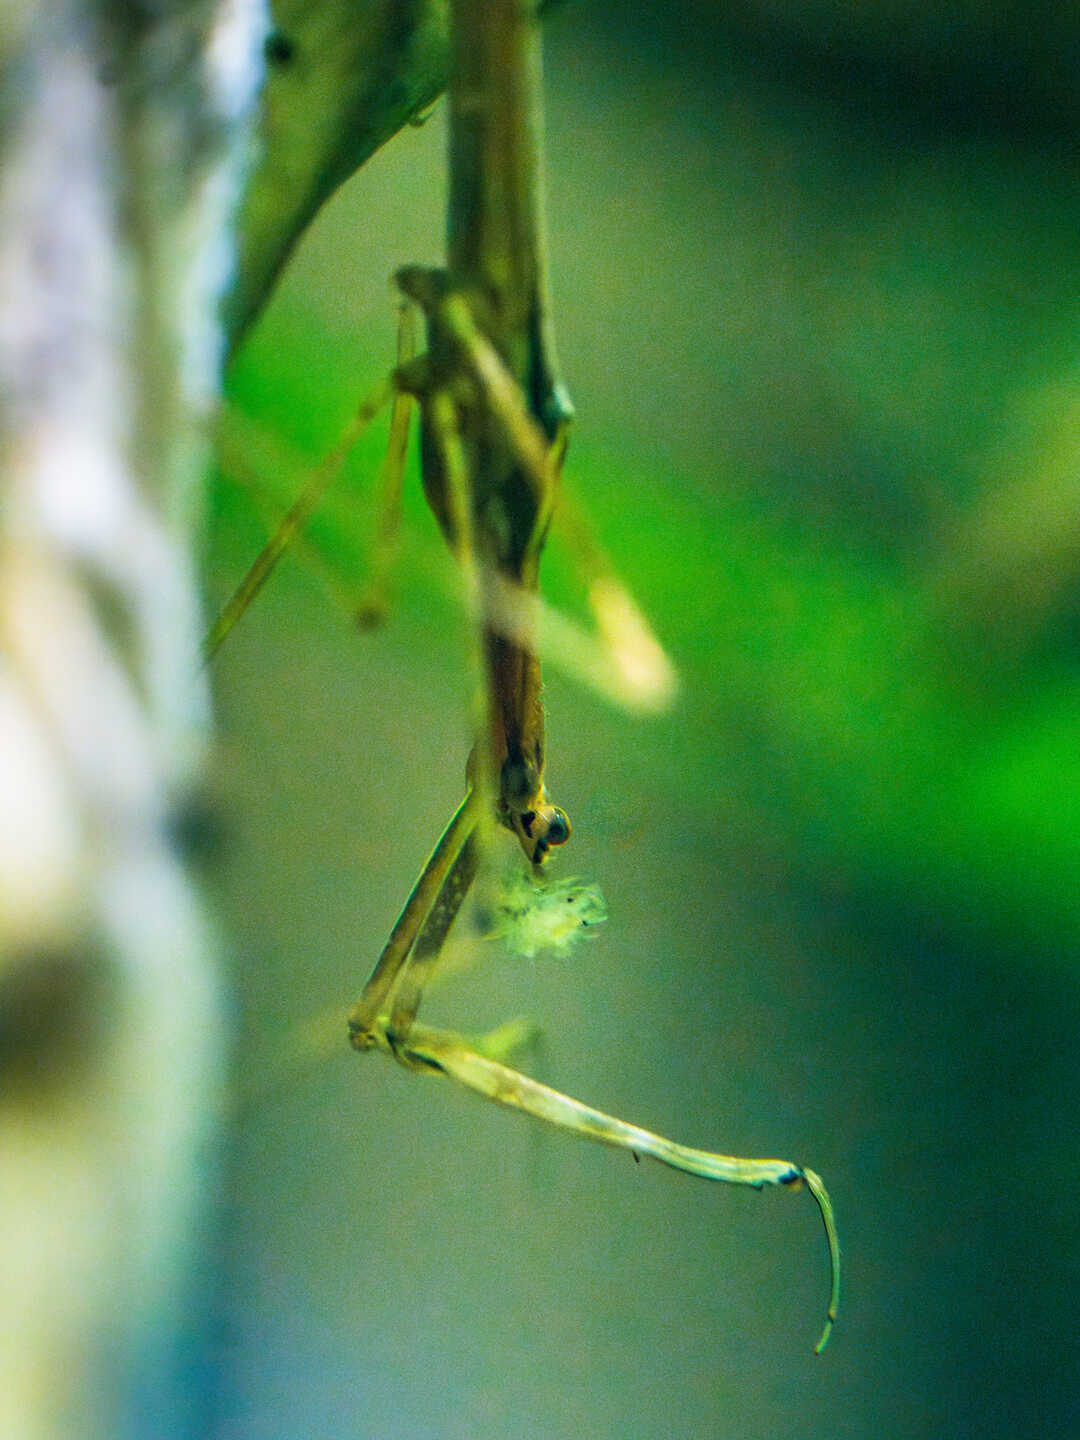 Water scorpion insect hanging upside down in Venom exhibition at Cal Academy. Photo by Gayle Laird